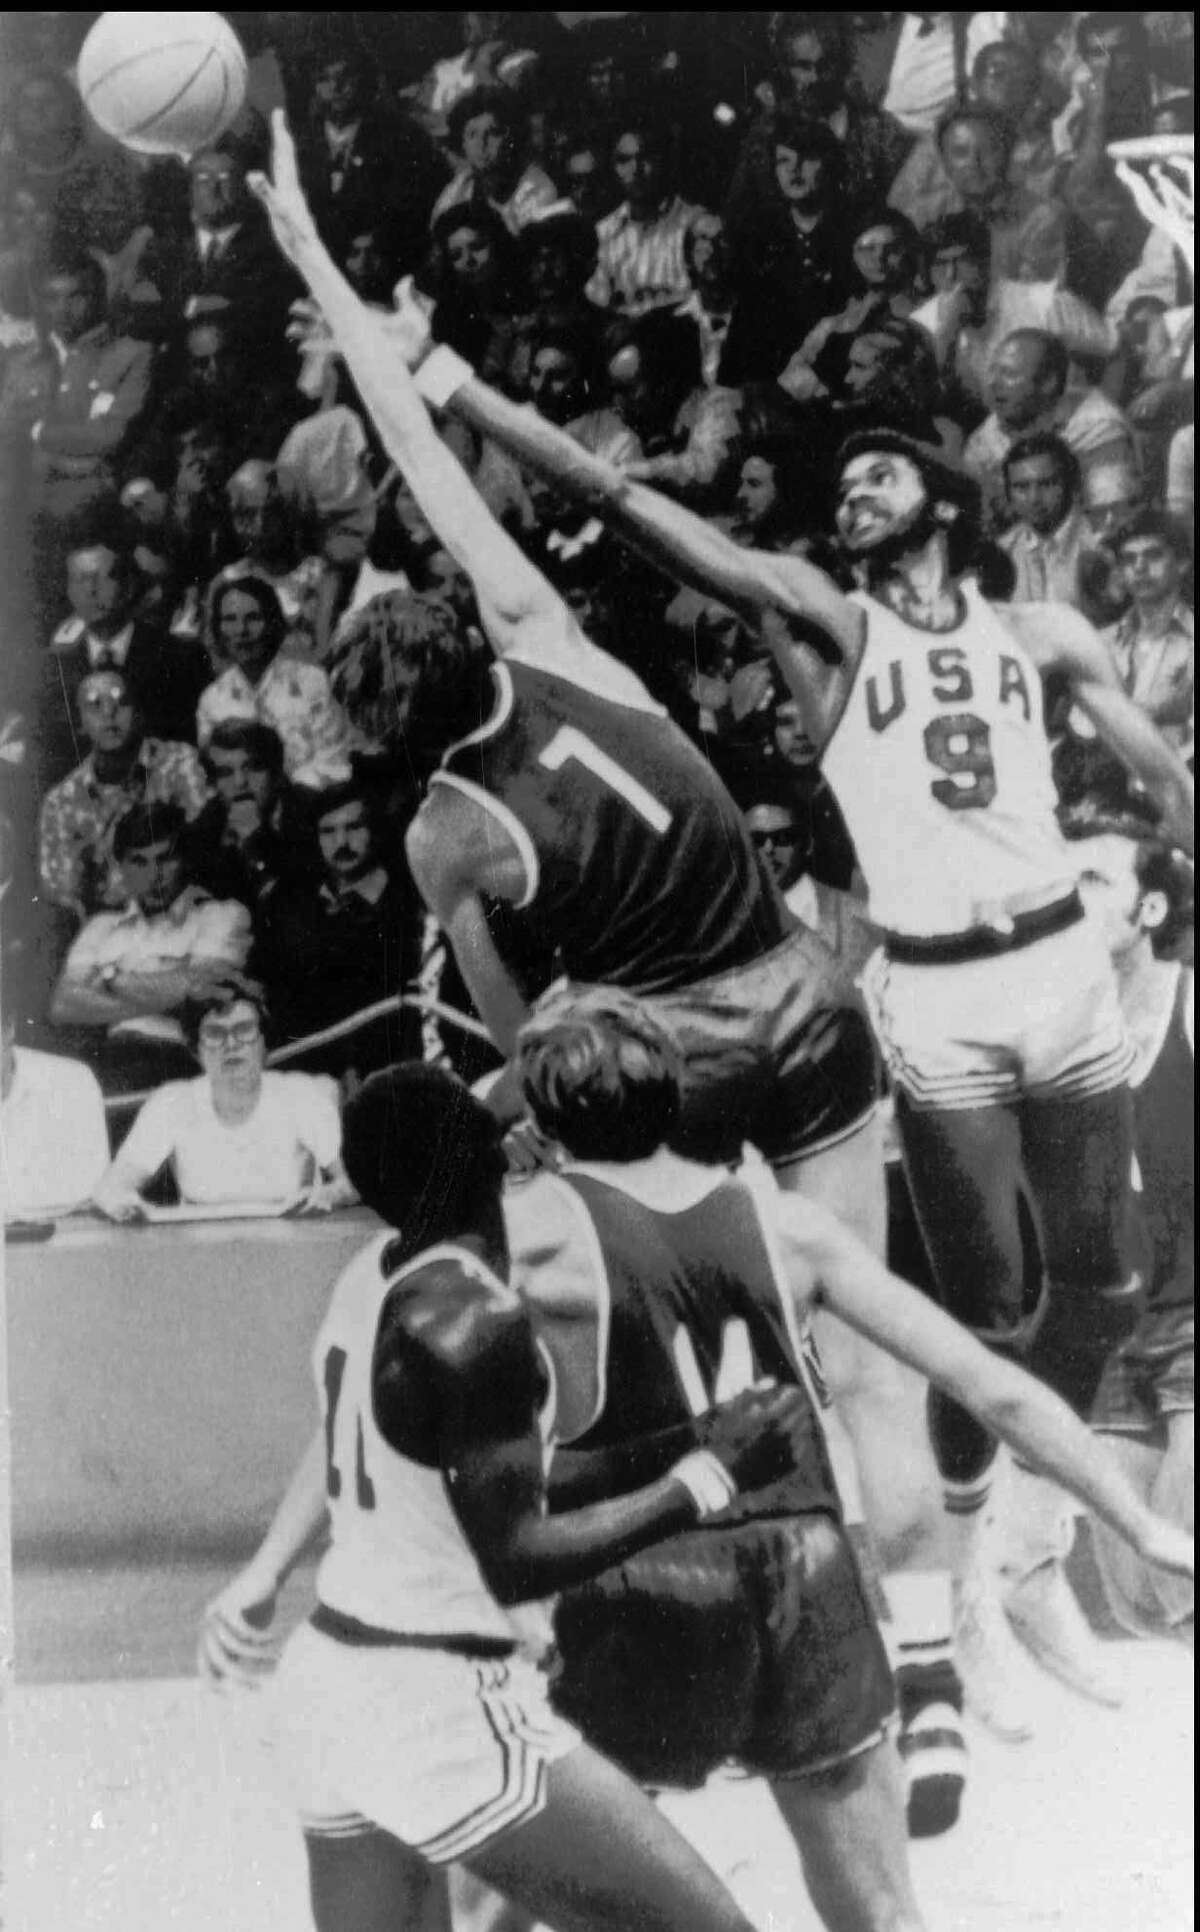 Dwight Jones, right, was involved in one of basket-ball's most controversial games, the United States' loss to the Soviet Union in the 1972 Olympic final.